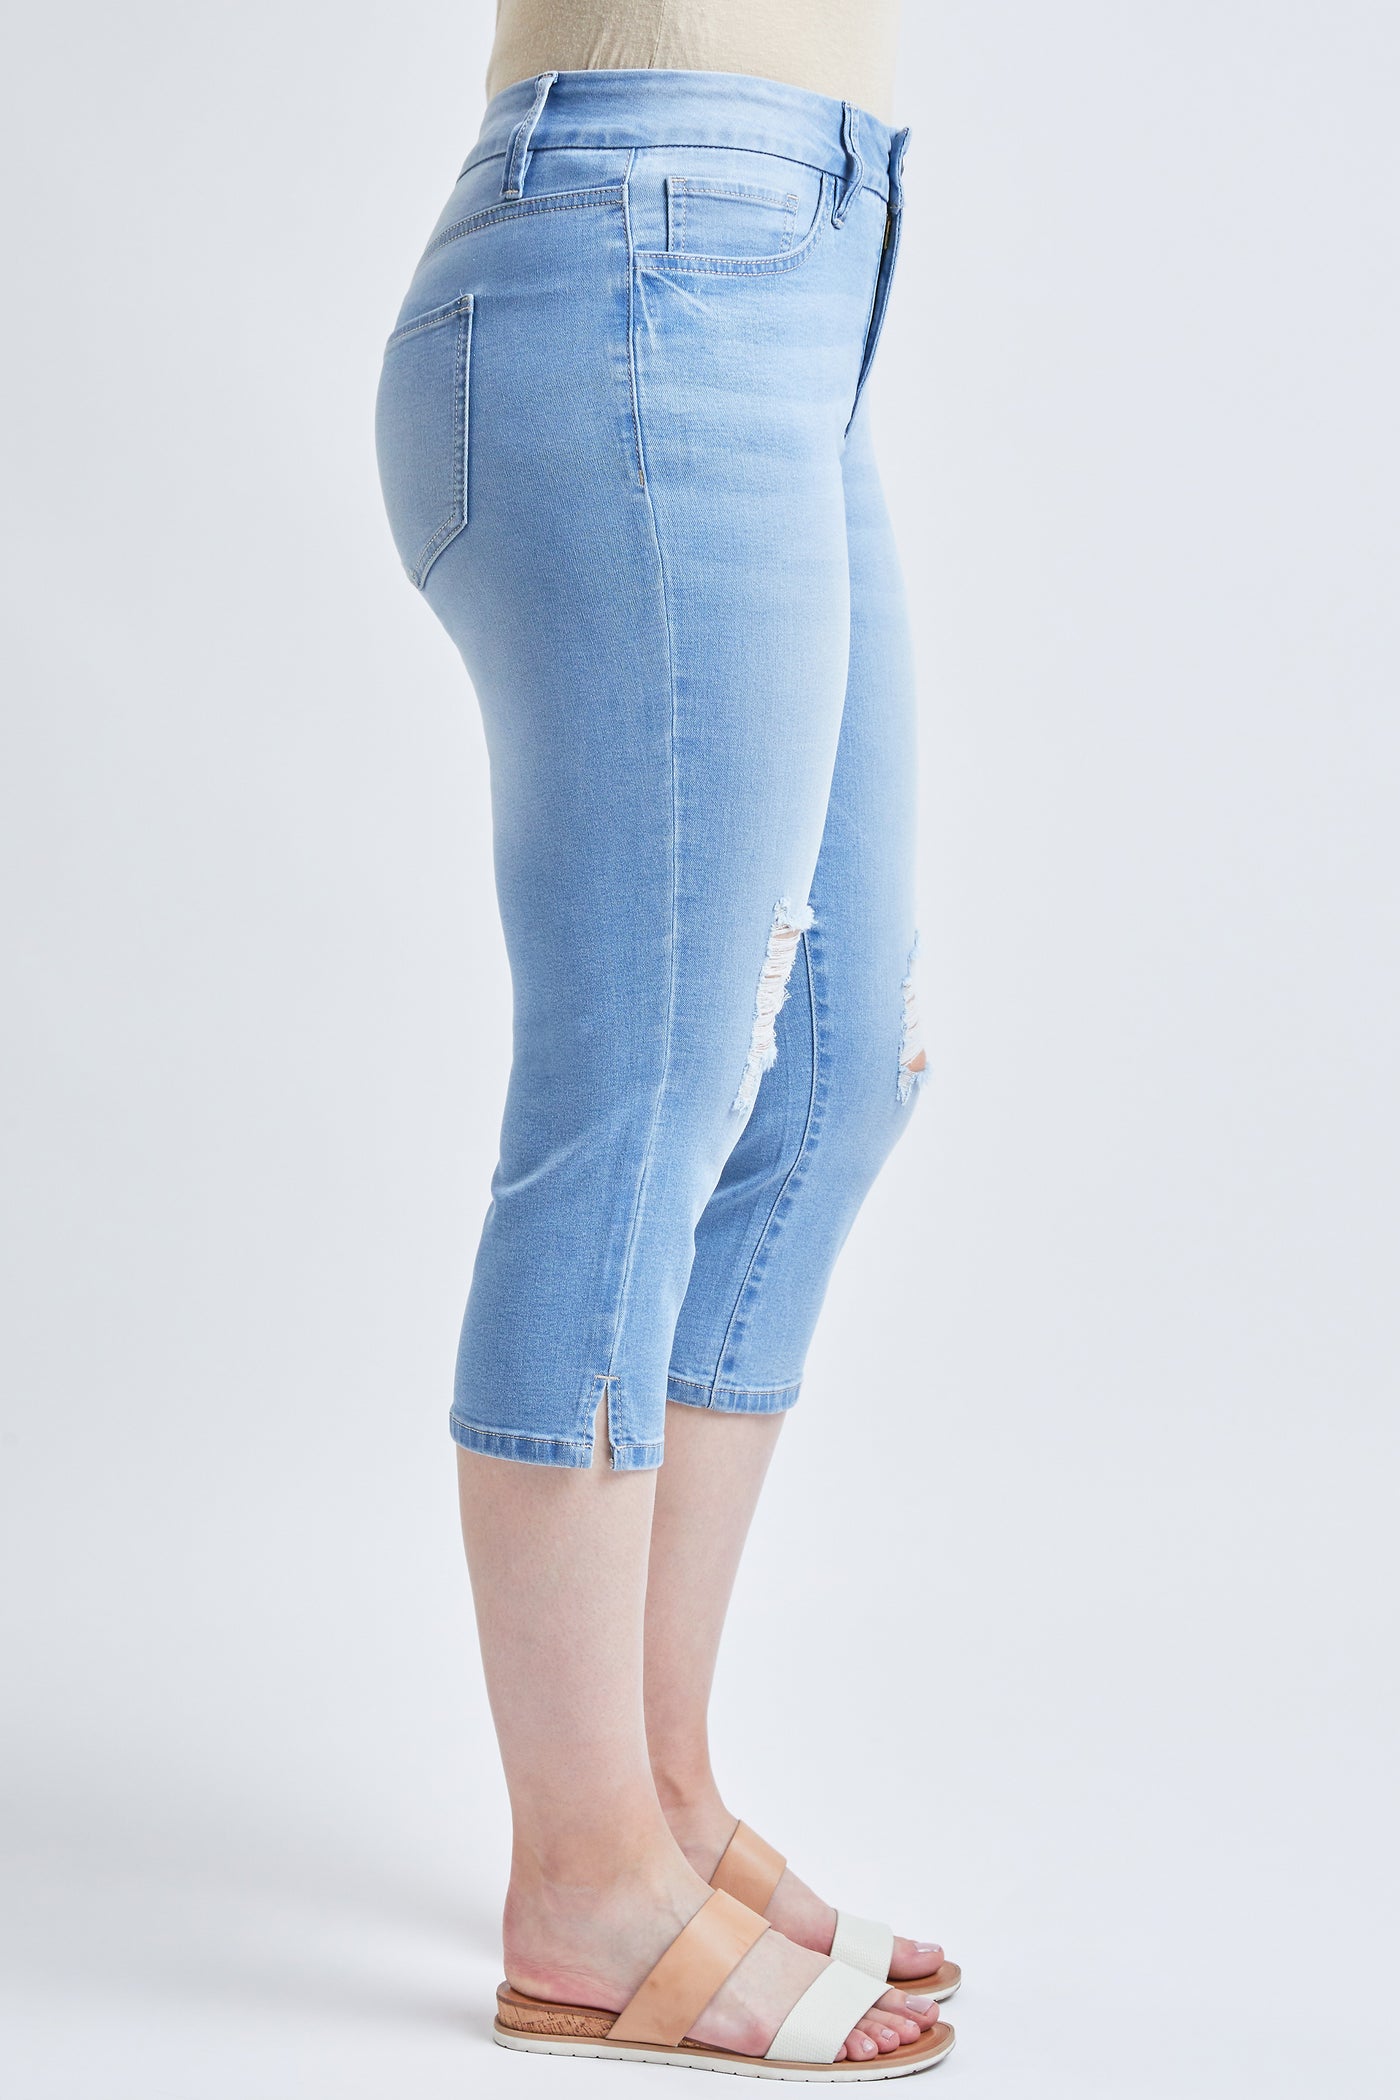 Missy Curvy High Rise Side Slit Hem Capri Pants 12 Pack from Royalty for Me  – YMI JEANS WHOLESALE